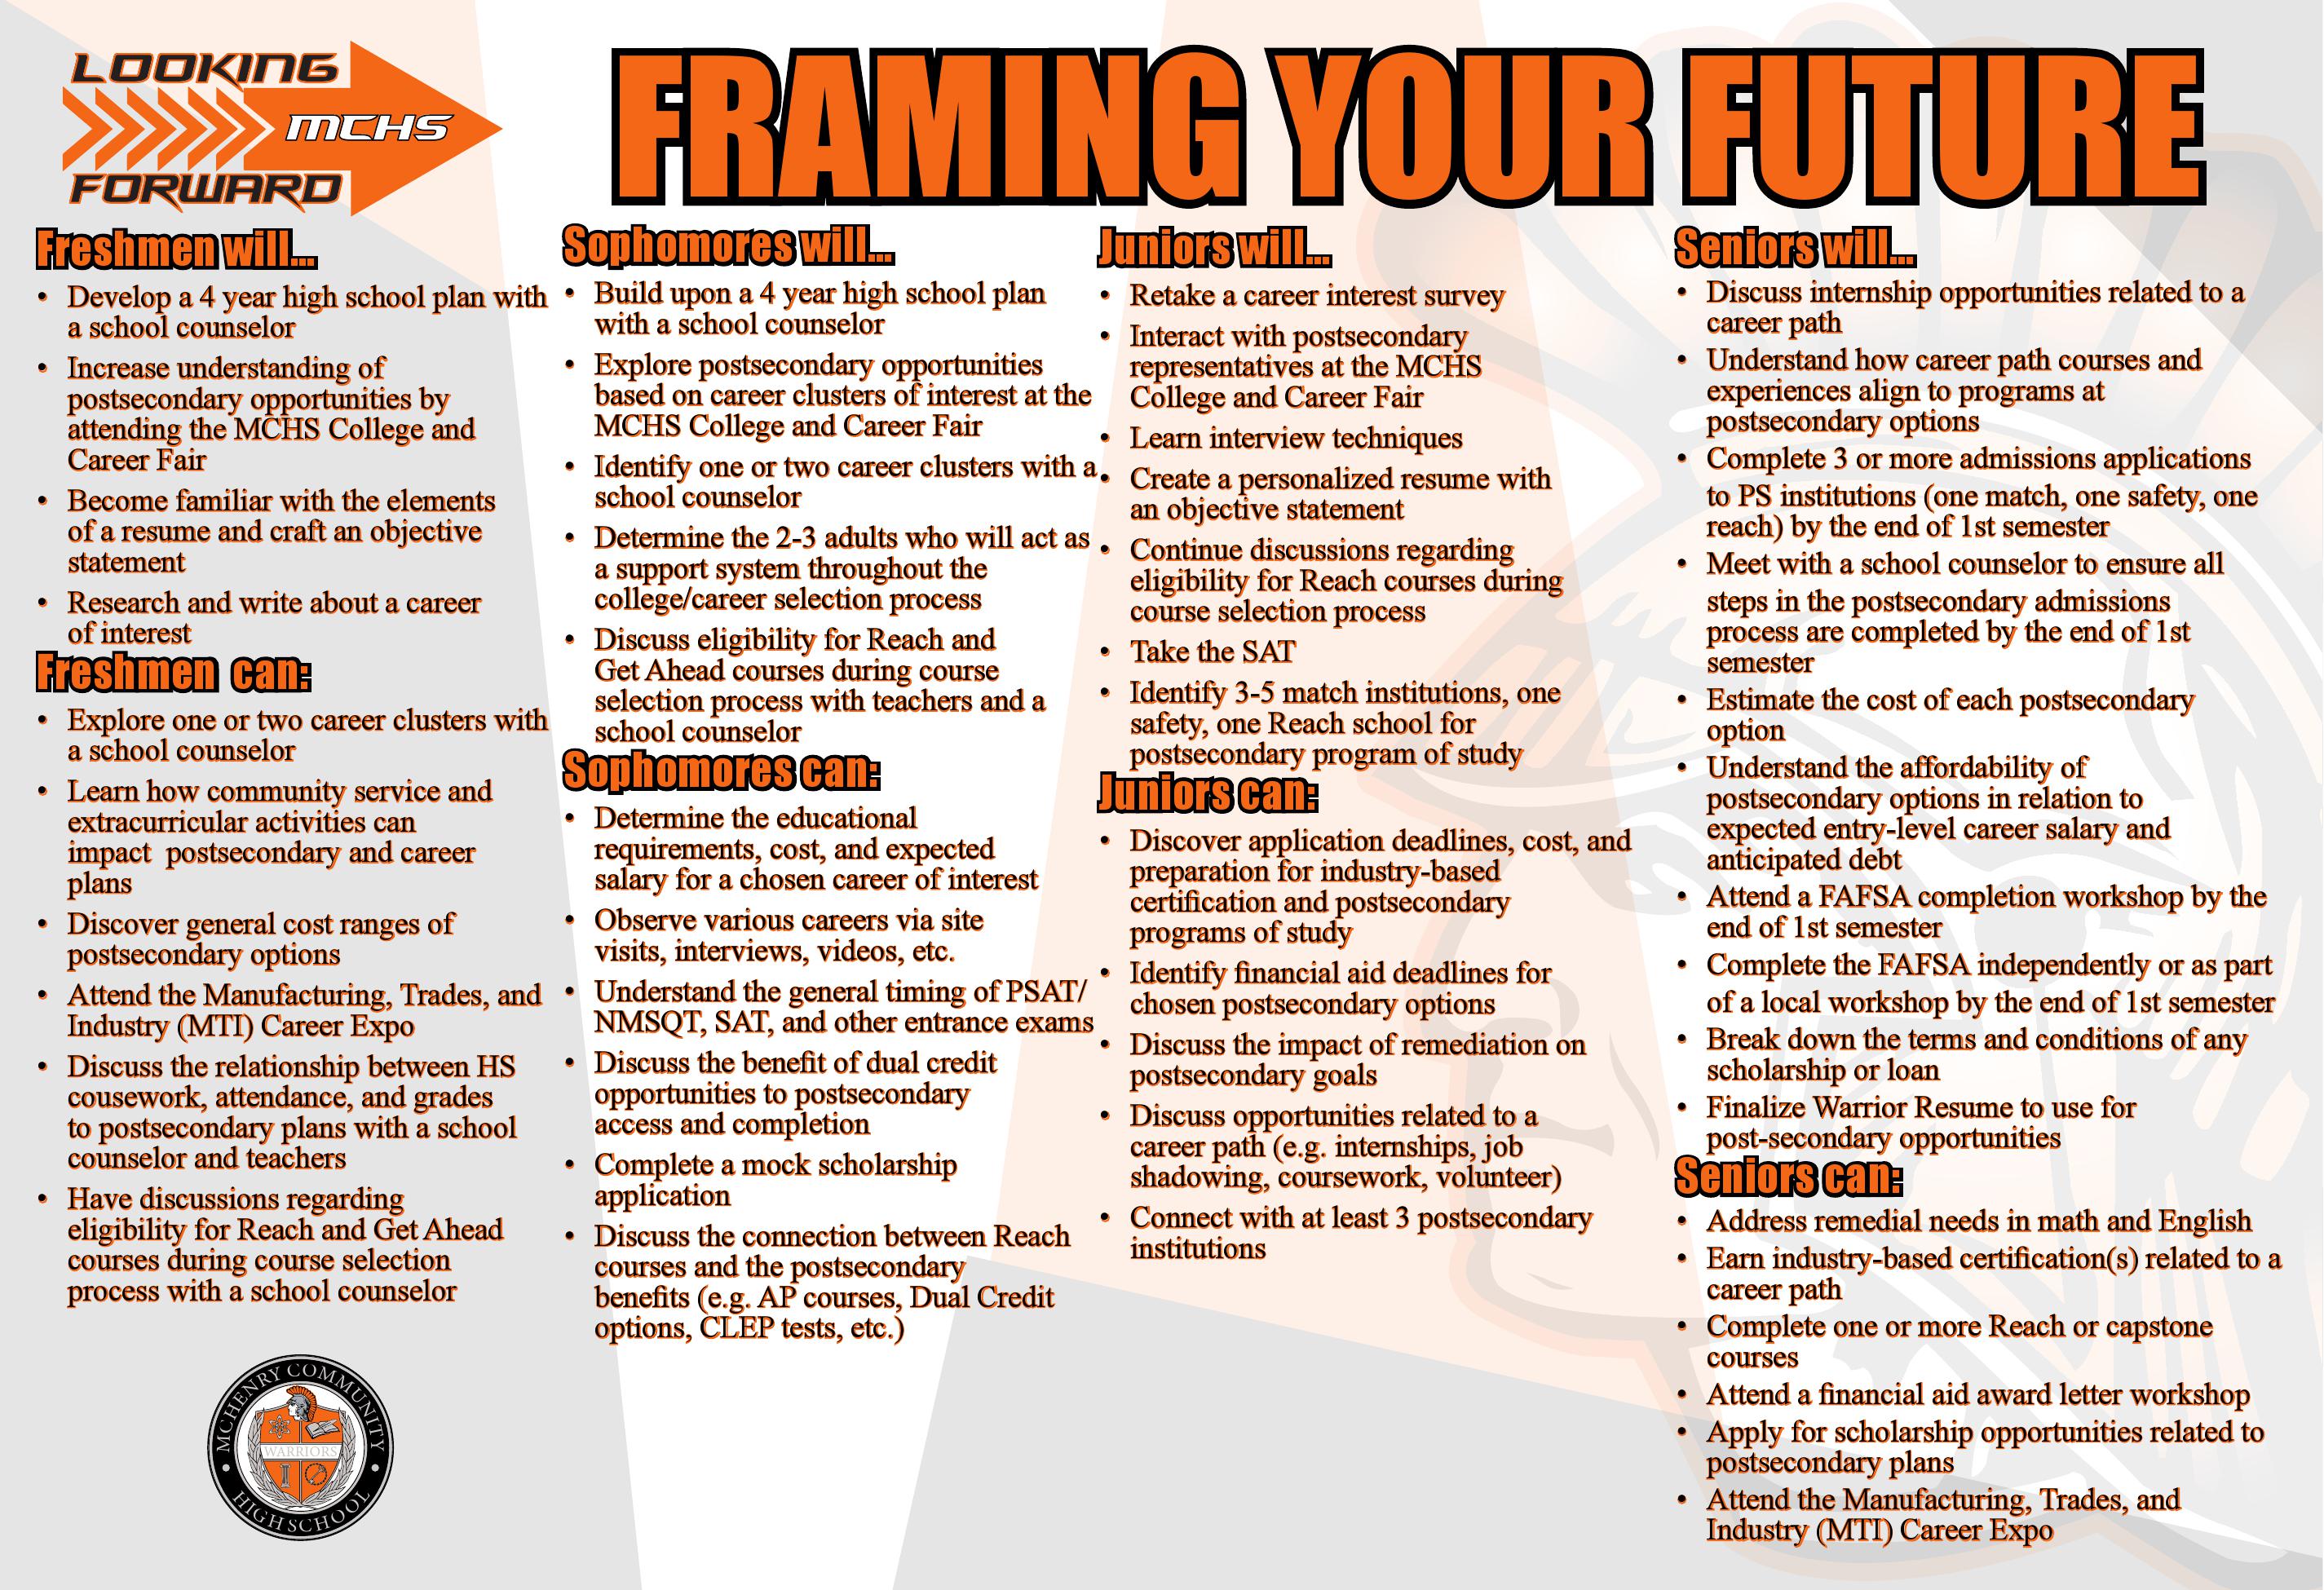 MCHS Framing Your Future